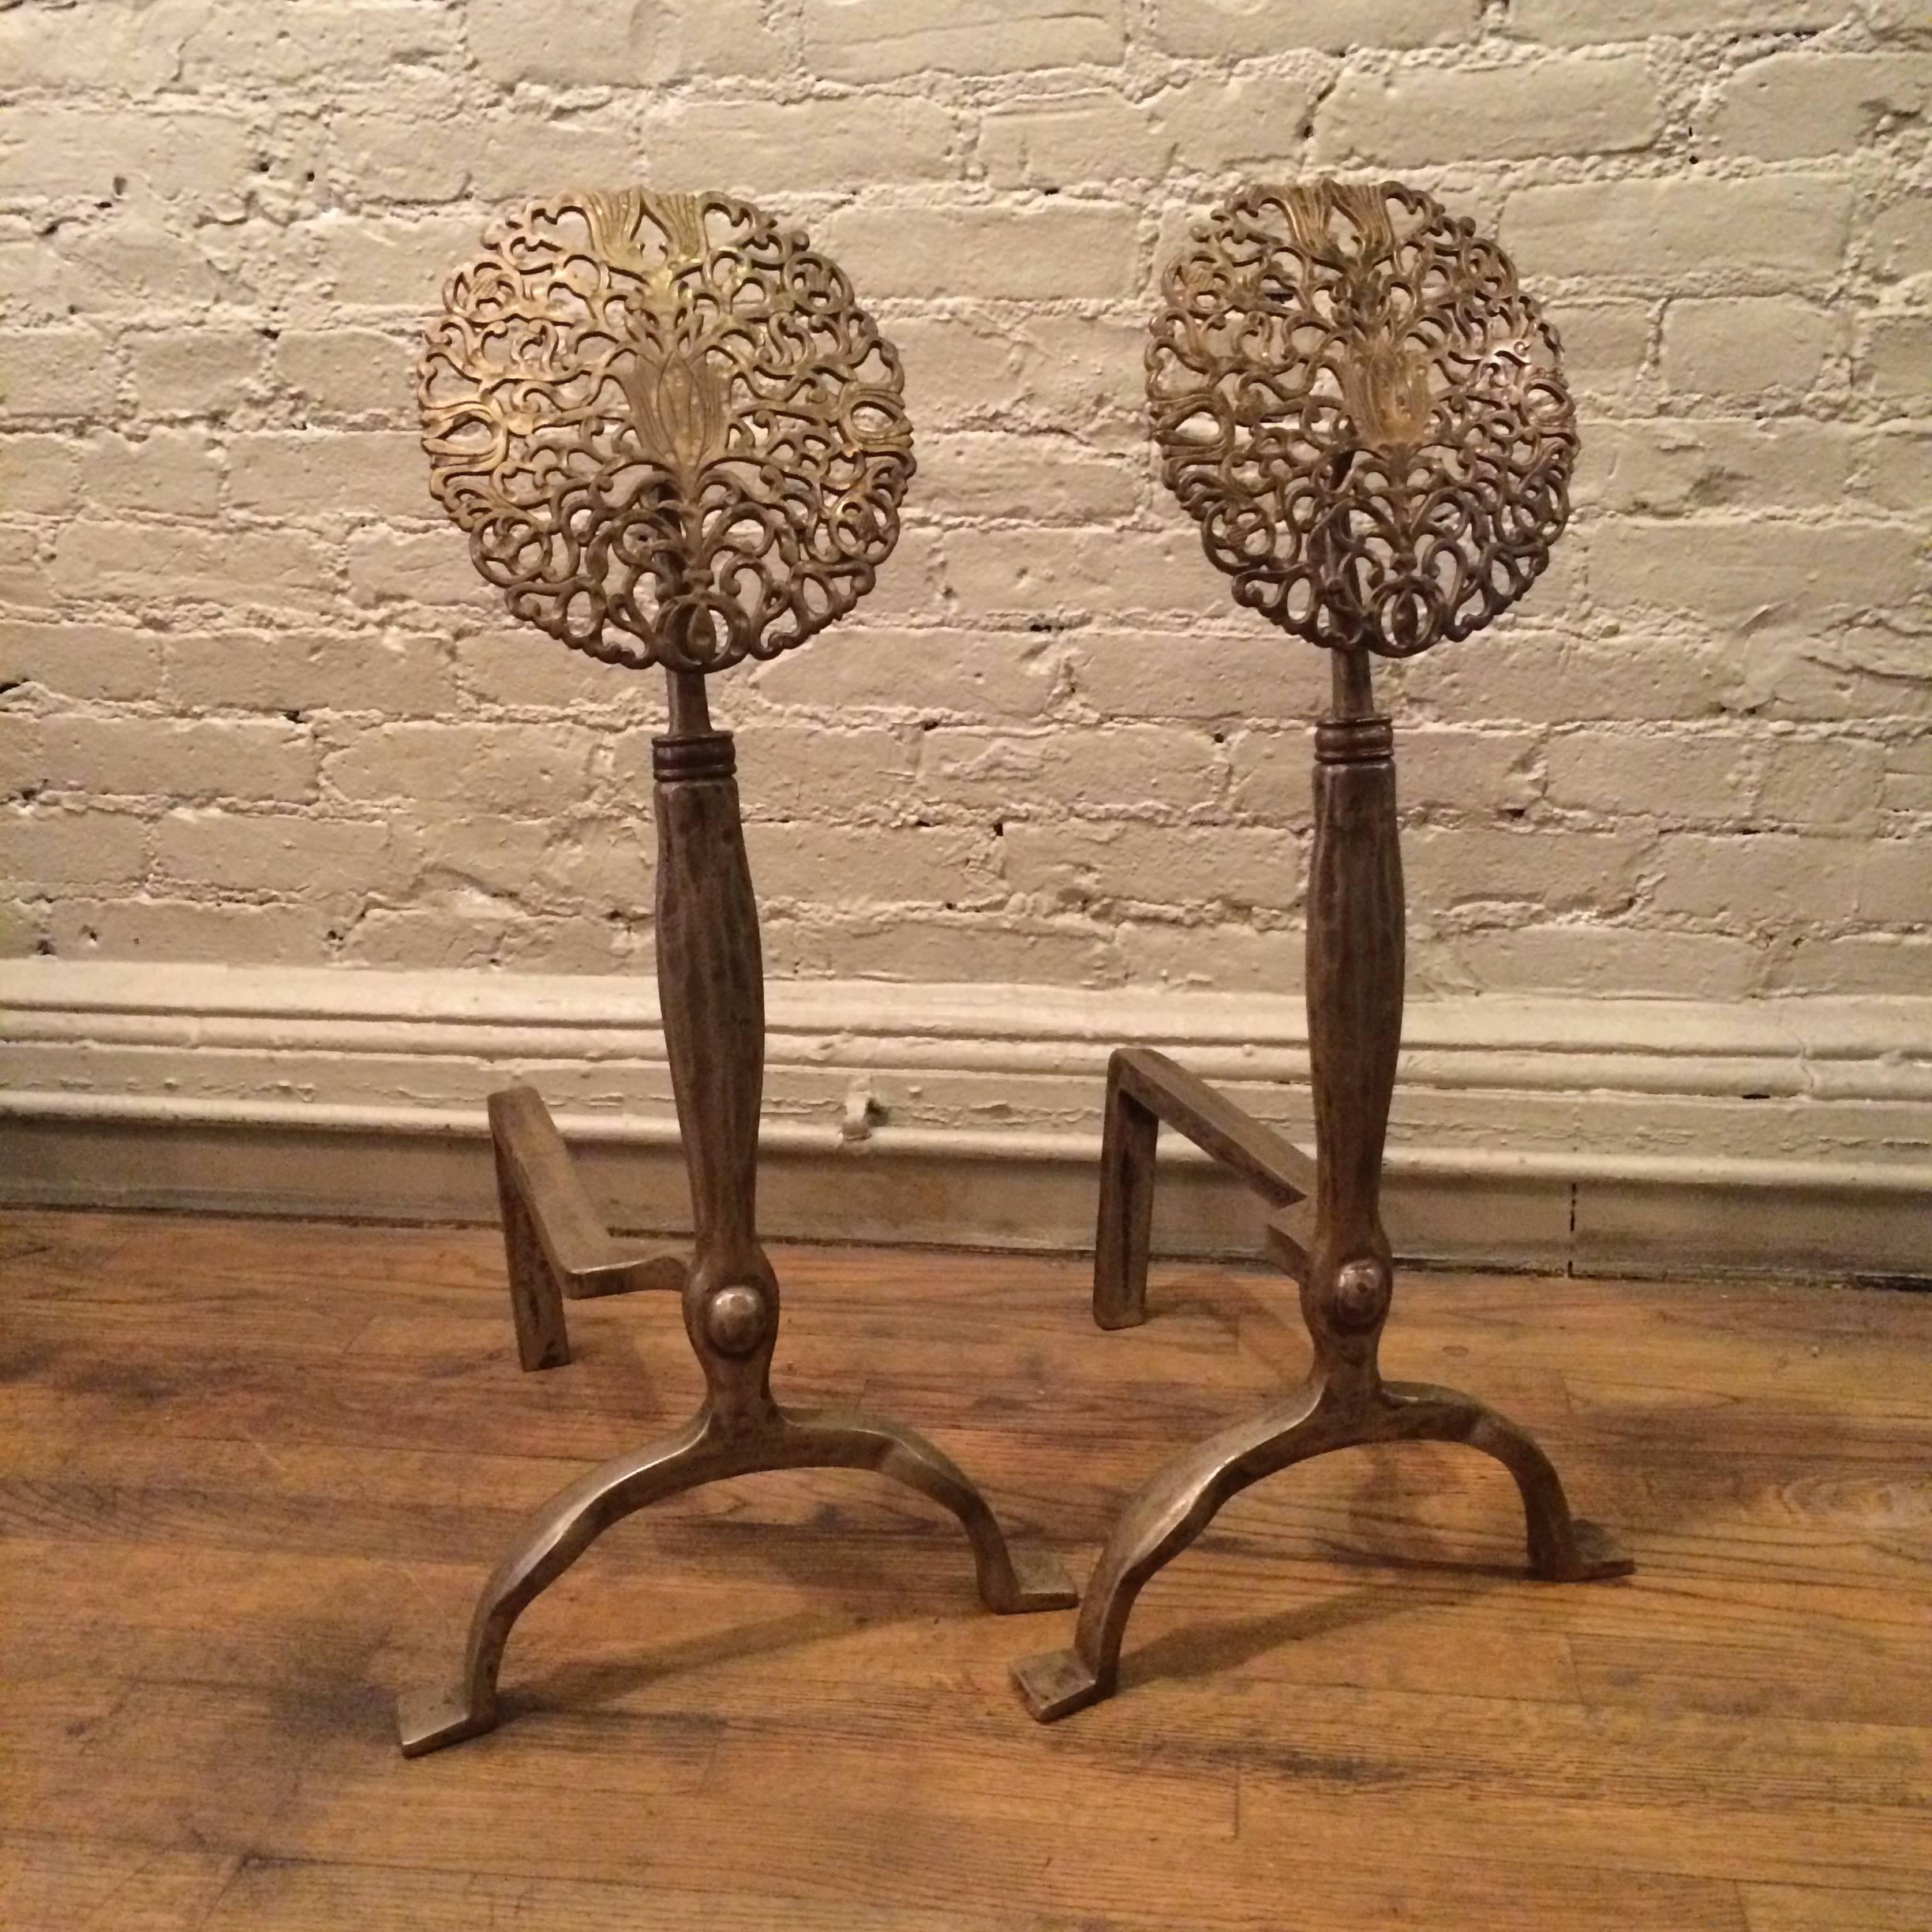 Pair of outstanding, Arts & Crafts, hand-forged, nickel-plated iron andirons with bronze blossom motifs in the style of Earnest Gimson, Cotwold School.